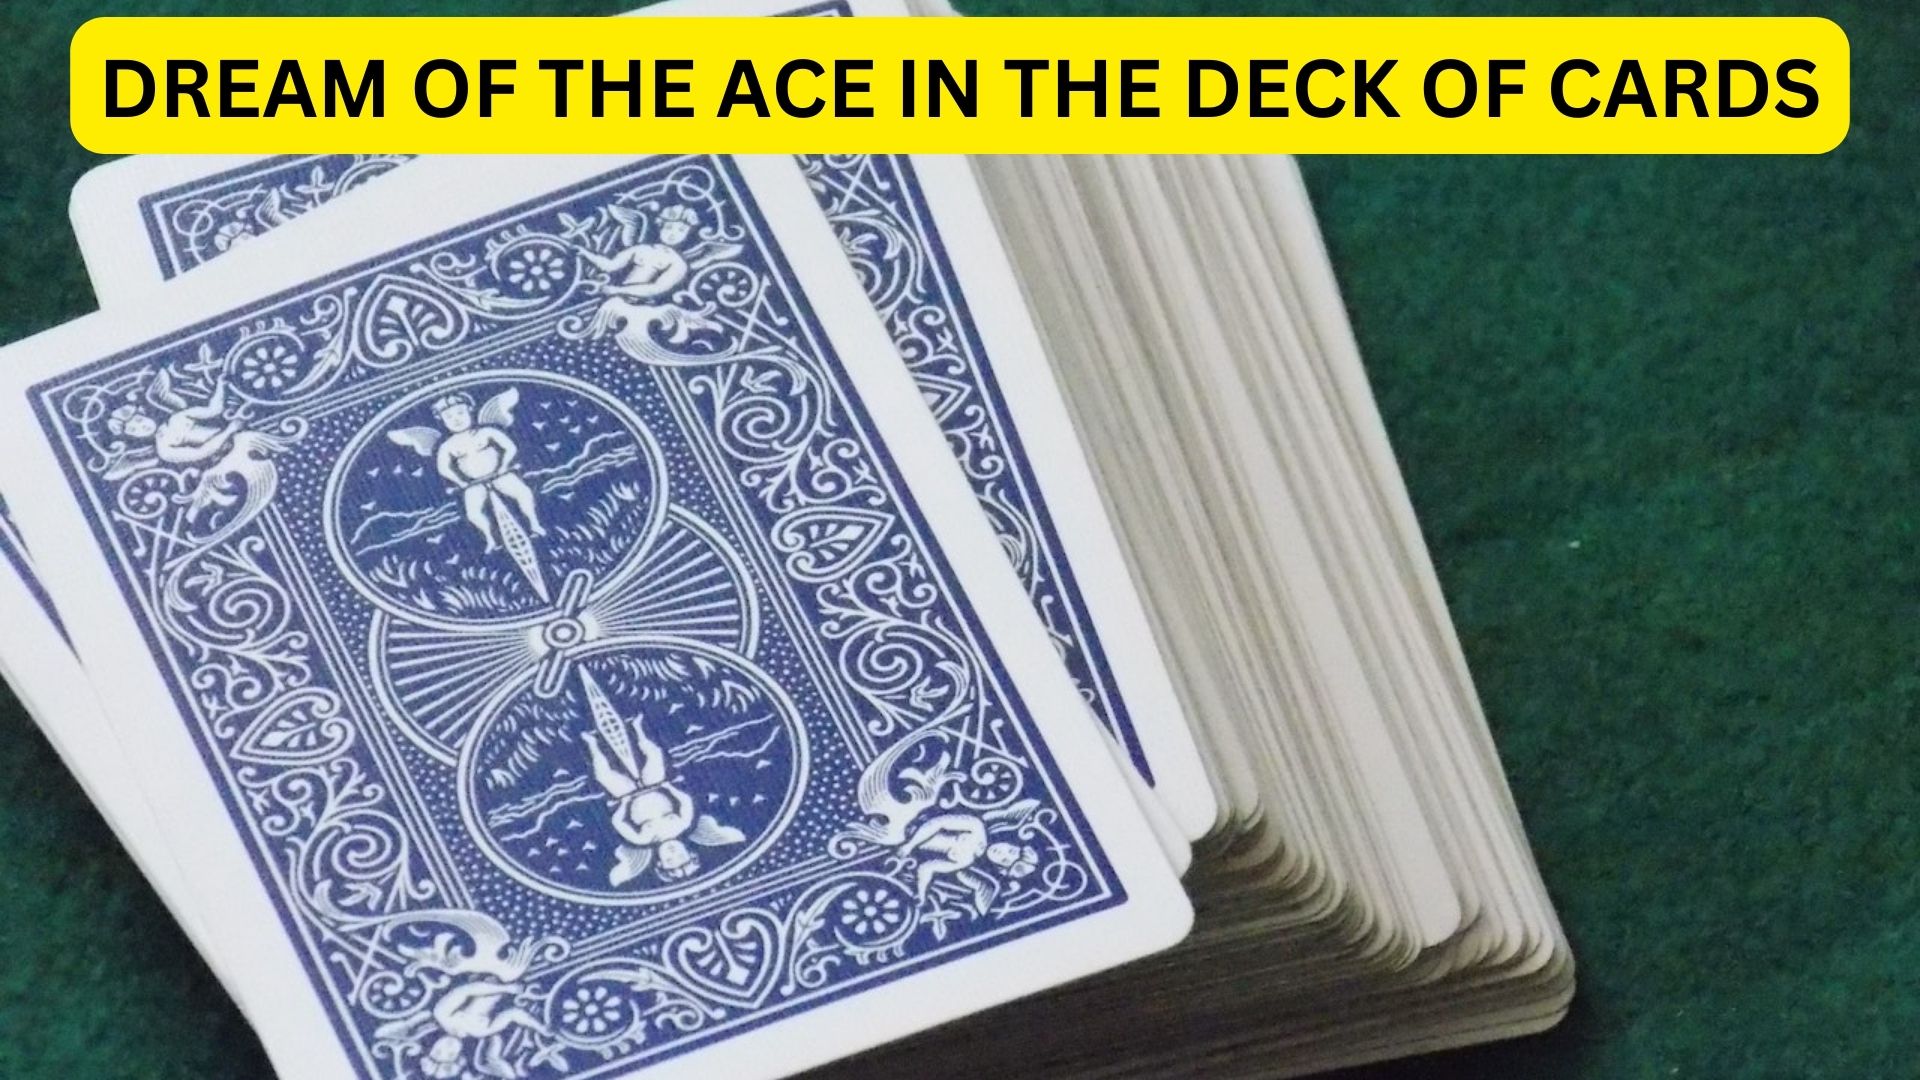 Dream Of The Ace In The Deck Of Cards - Meaning And Interpretation